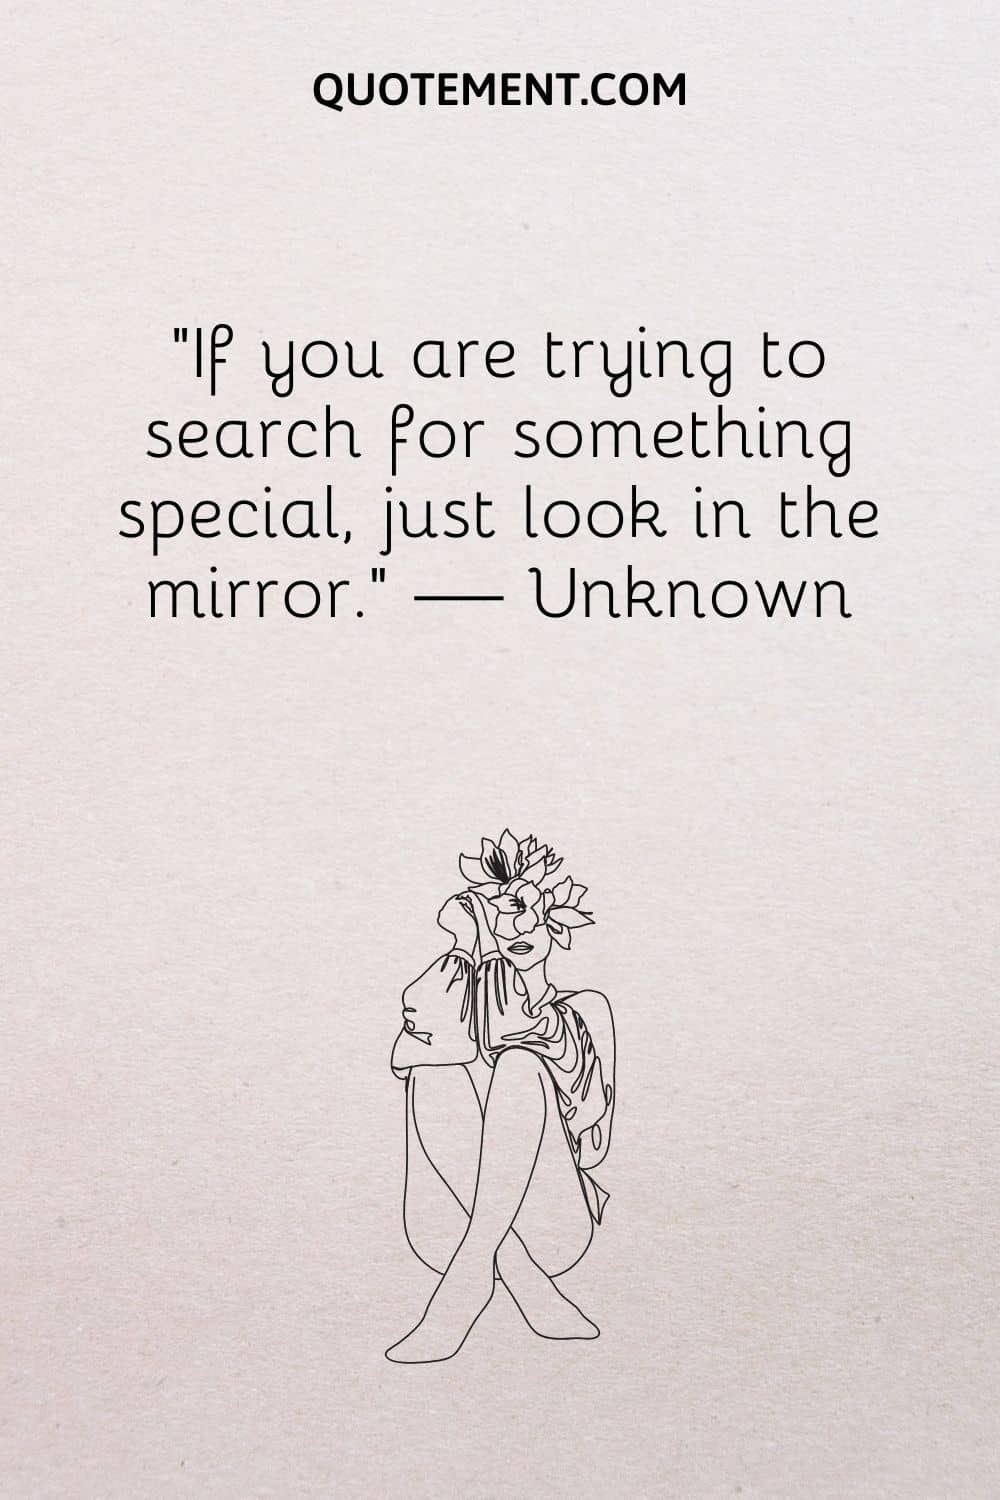 If you are trying to search for something special, just look in the mirror.